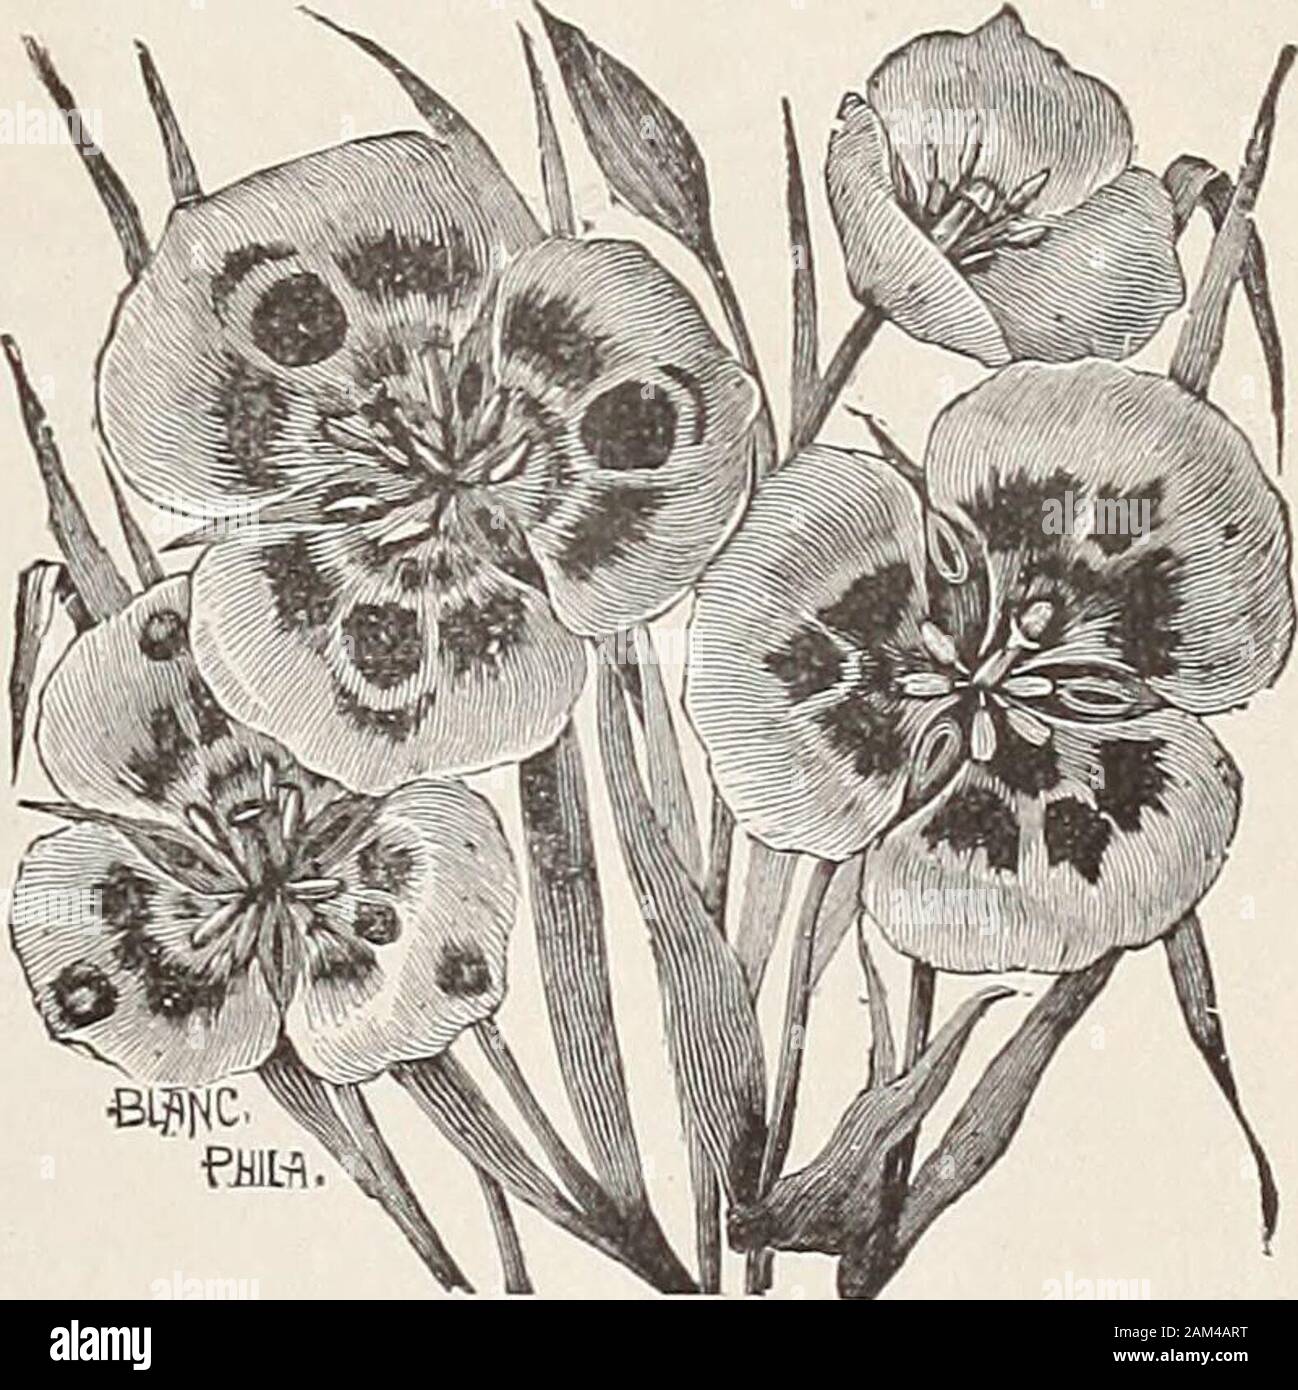 Catalogue of bulbs, plants and seeds for fall planting, 1898 . Amaryllis Belladonna Hybrida—Large; crimson, white striped. Each,50c.  Vitatta—Handsome species, bearing white flow-ers, with deep rose-colored stripe through the centerof the petals. Each, 50c. CRINUM AMERICAN UNI Large spikes of beautiful white, sweet-scentedflowers. Each, 50c. Crinnm Yemense—This new variety was latelydiscovered in Arabia, and is one of the most valuableof recent introductions. The flowers are very largeand produced in immense umbels. They are sil-very white with rosy stripe and red buds, and verysweet scented. Stock Photo